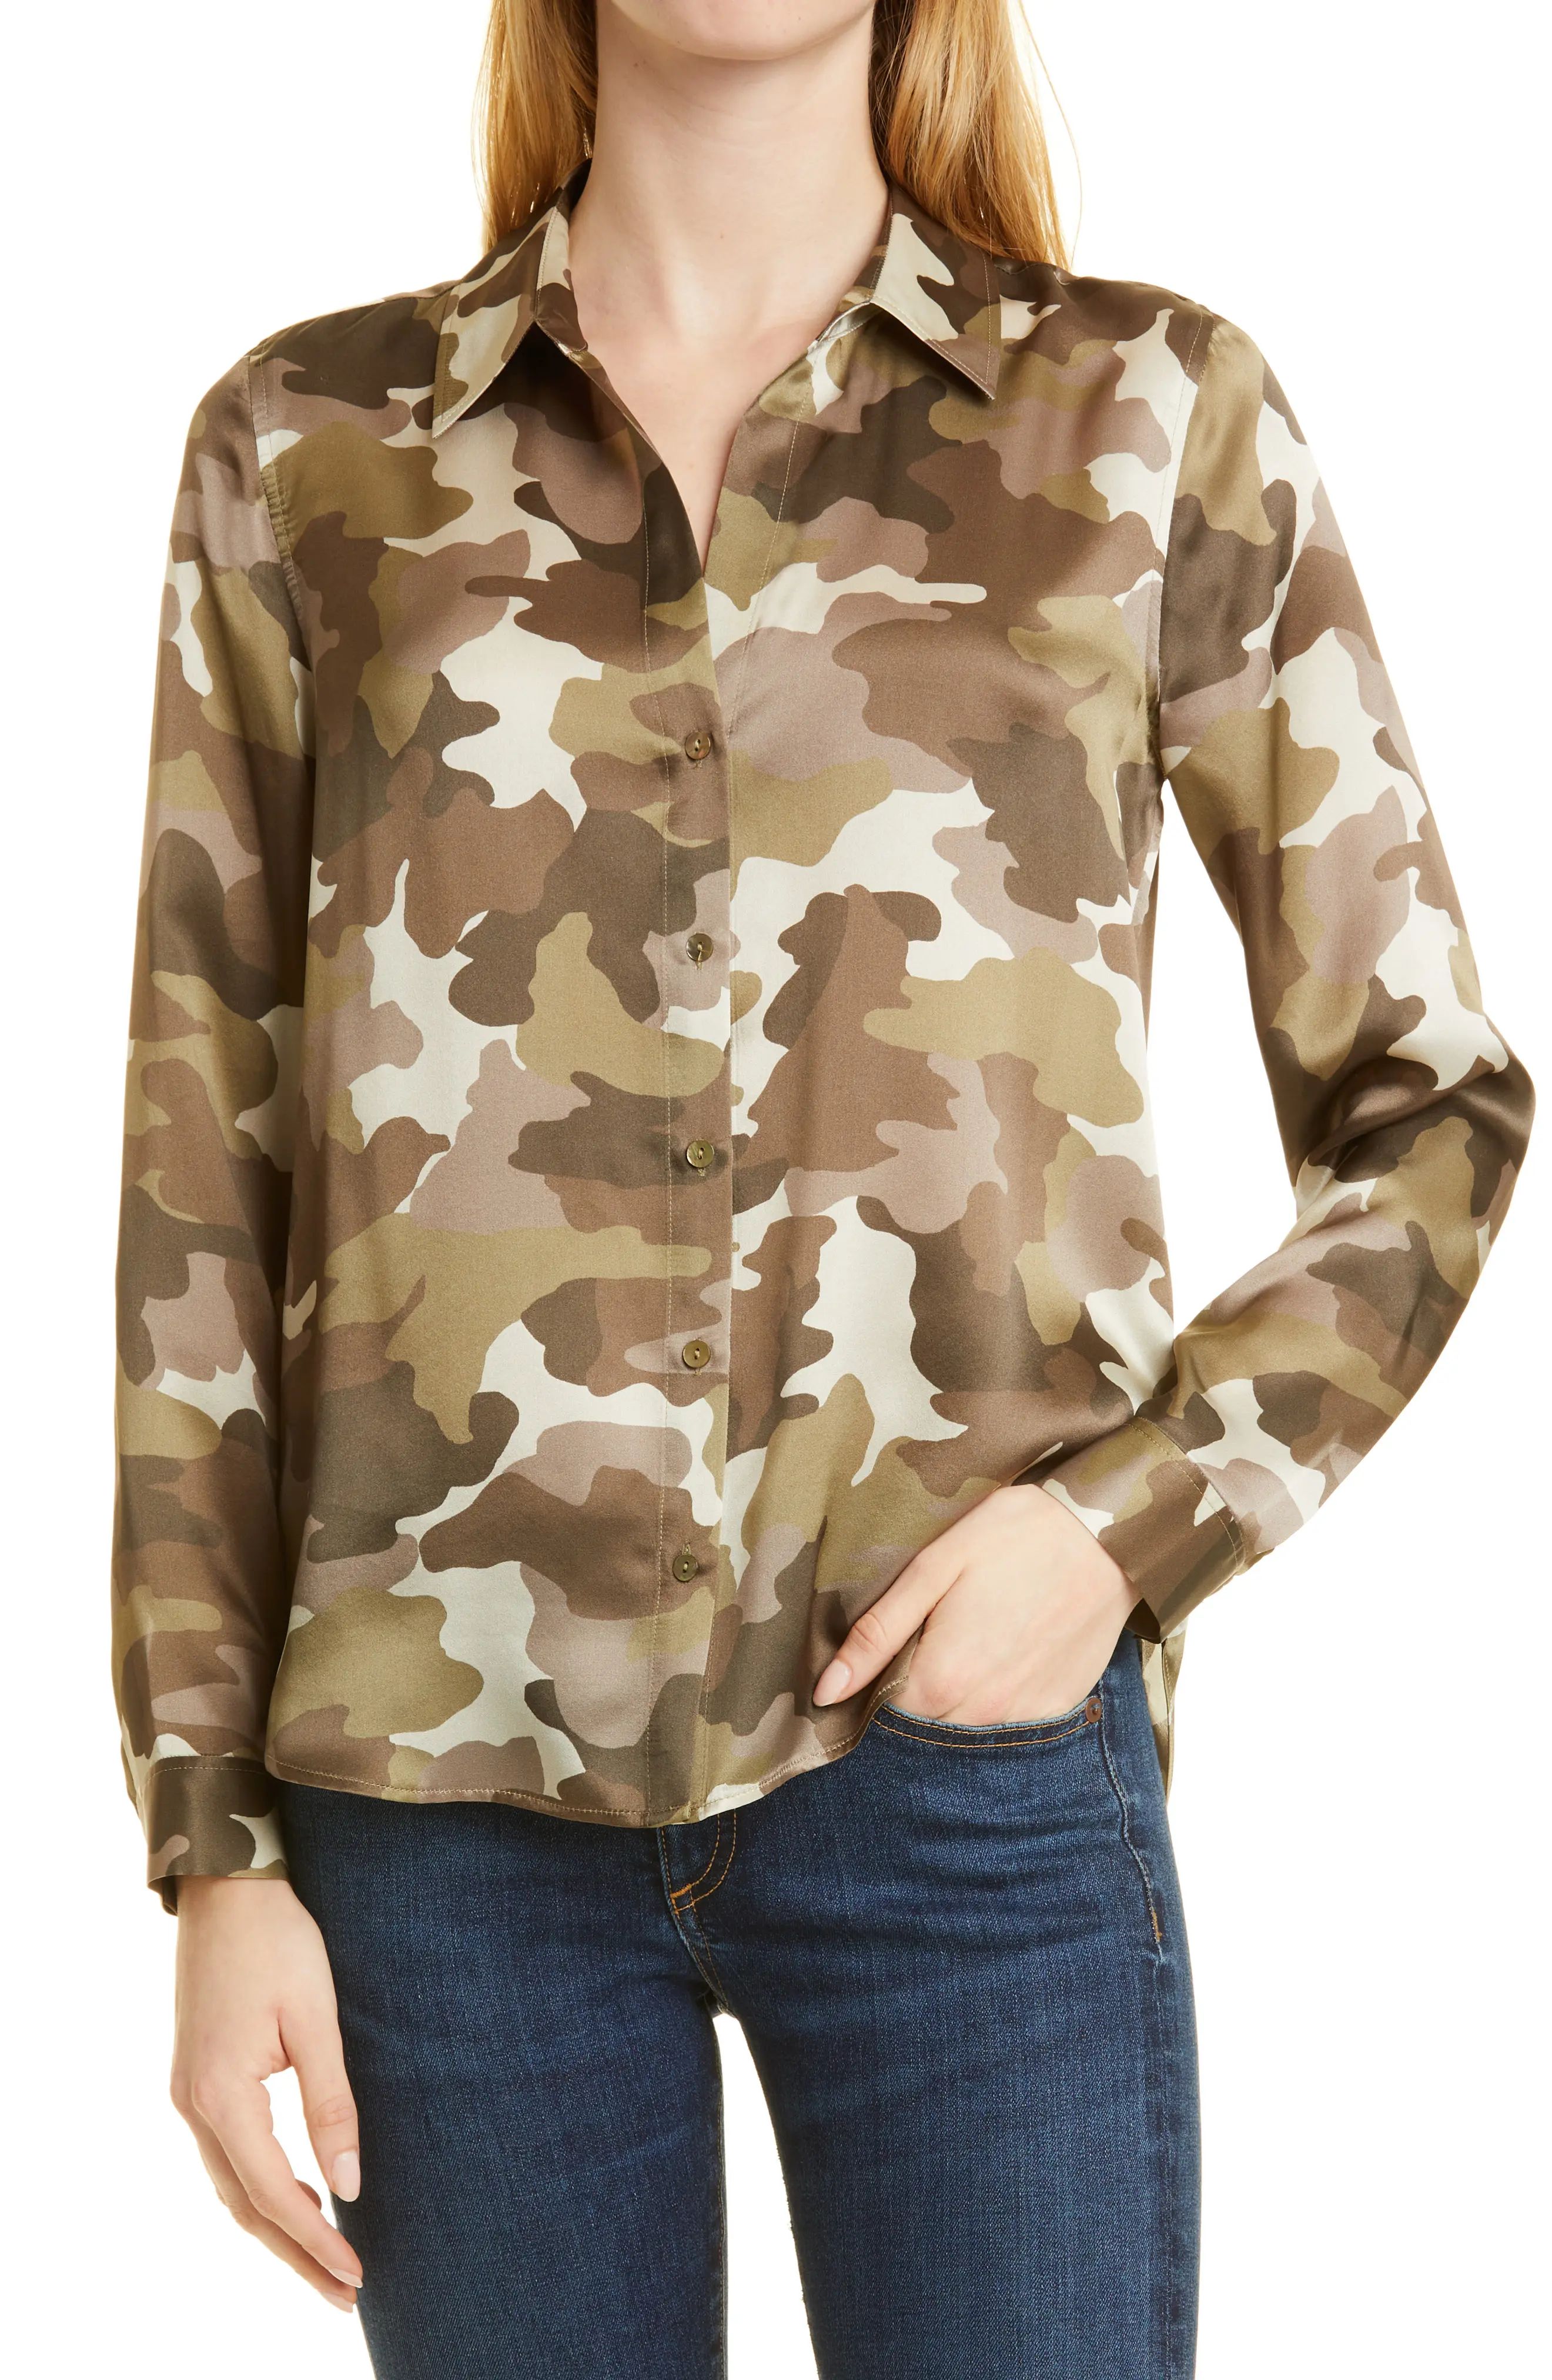 L'AGENCE Tyler Holly Camo Silk Blouse in Army Green Multi Camouflage at Nordstrom, Size Small | Nordstrom